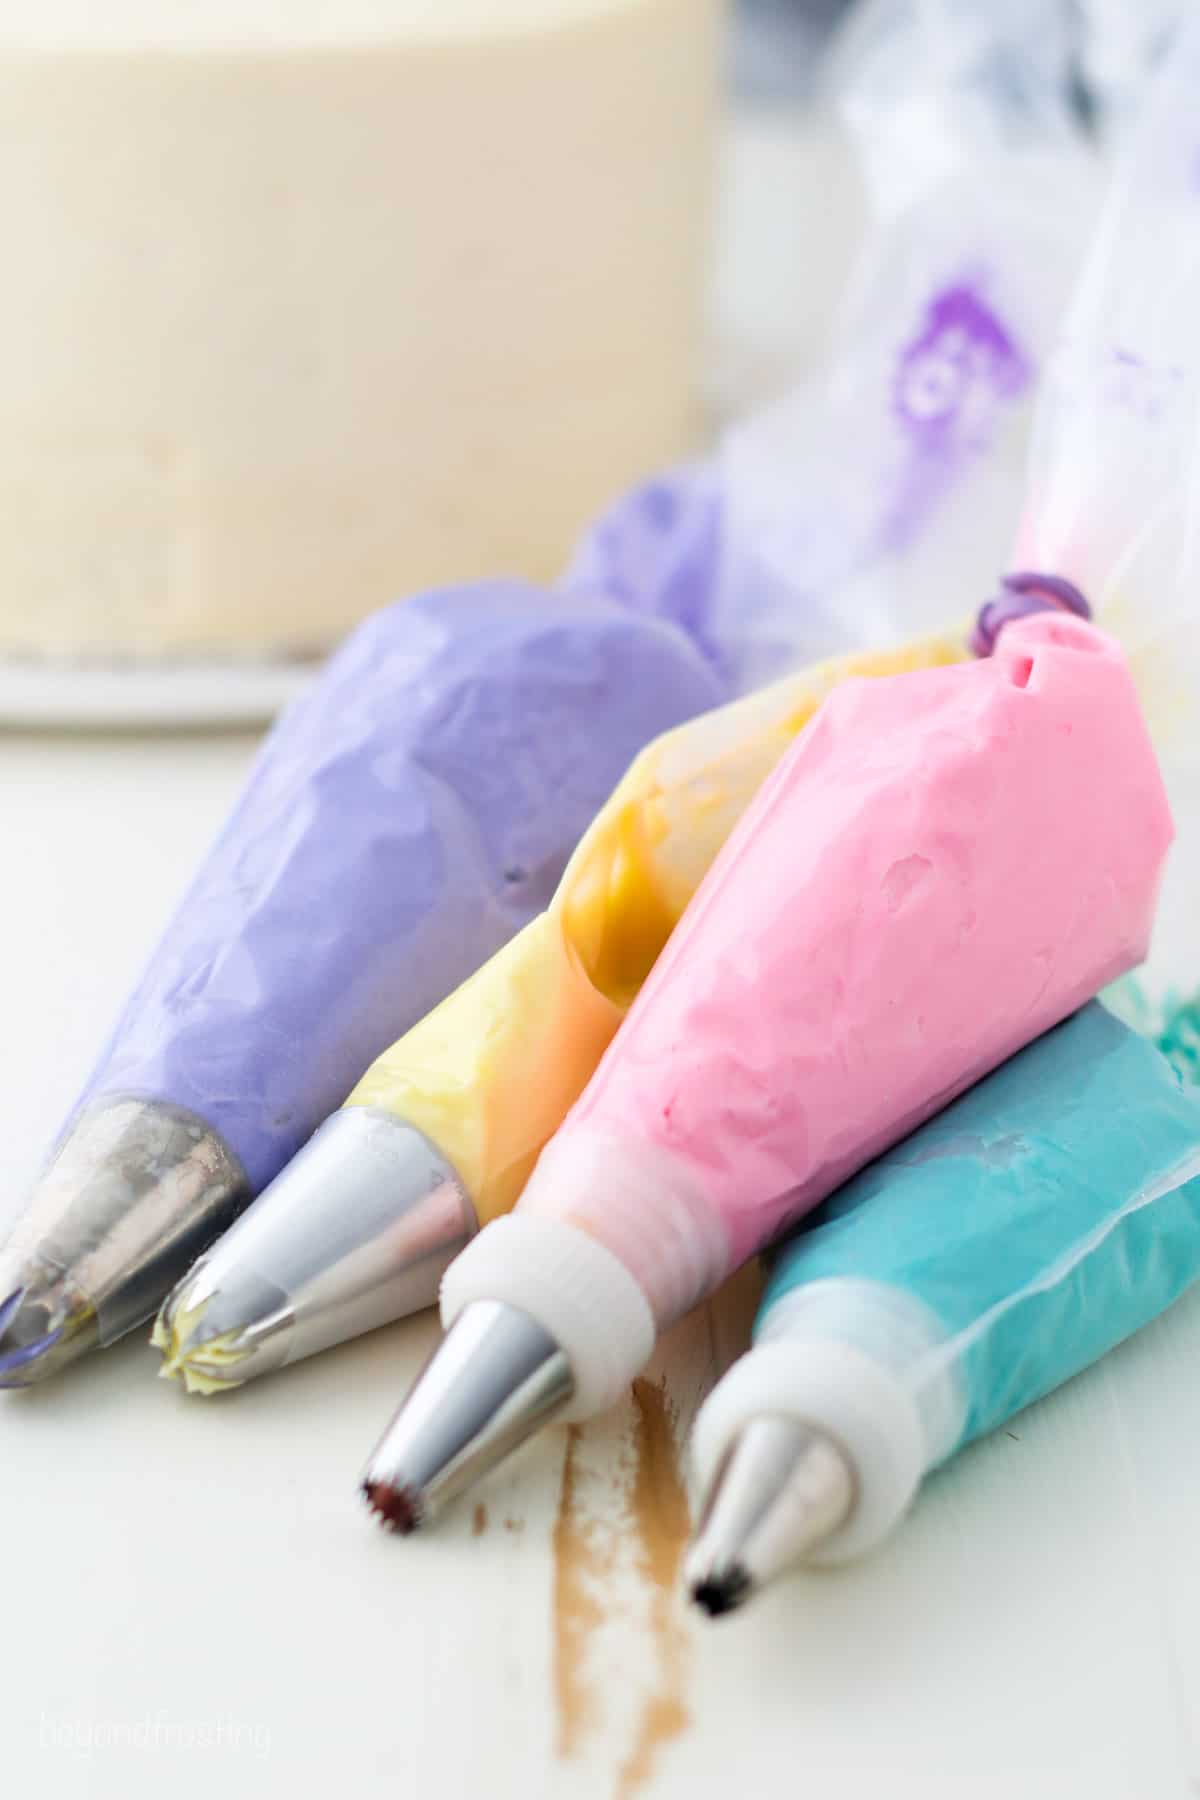 Stacked piping bags filled with pastel purple, yellow, pink, and turquoise buttercream.